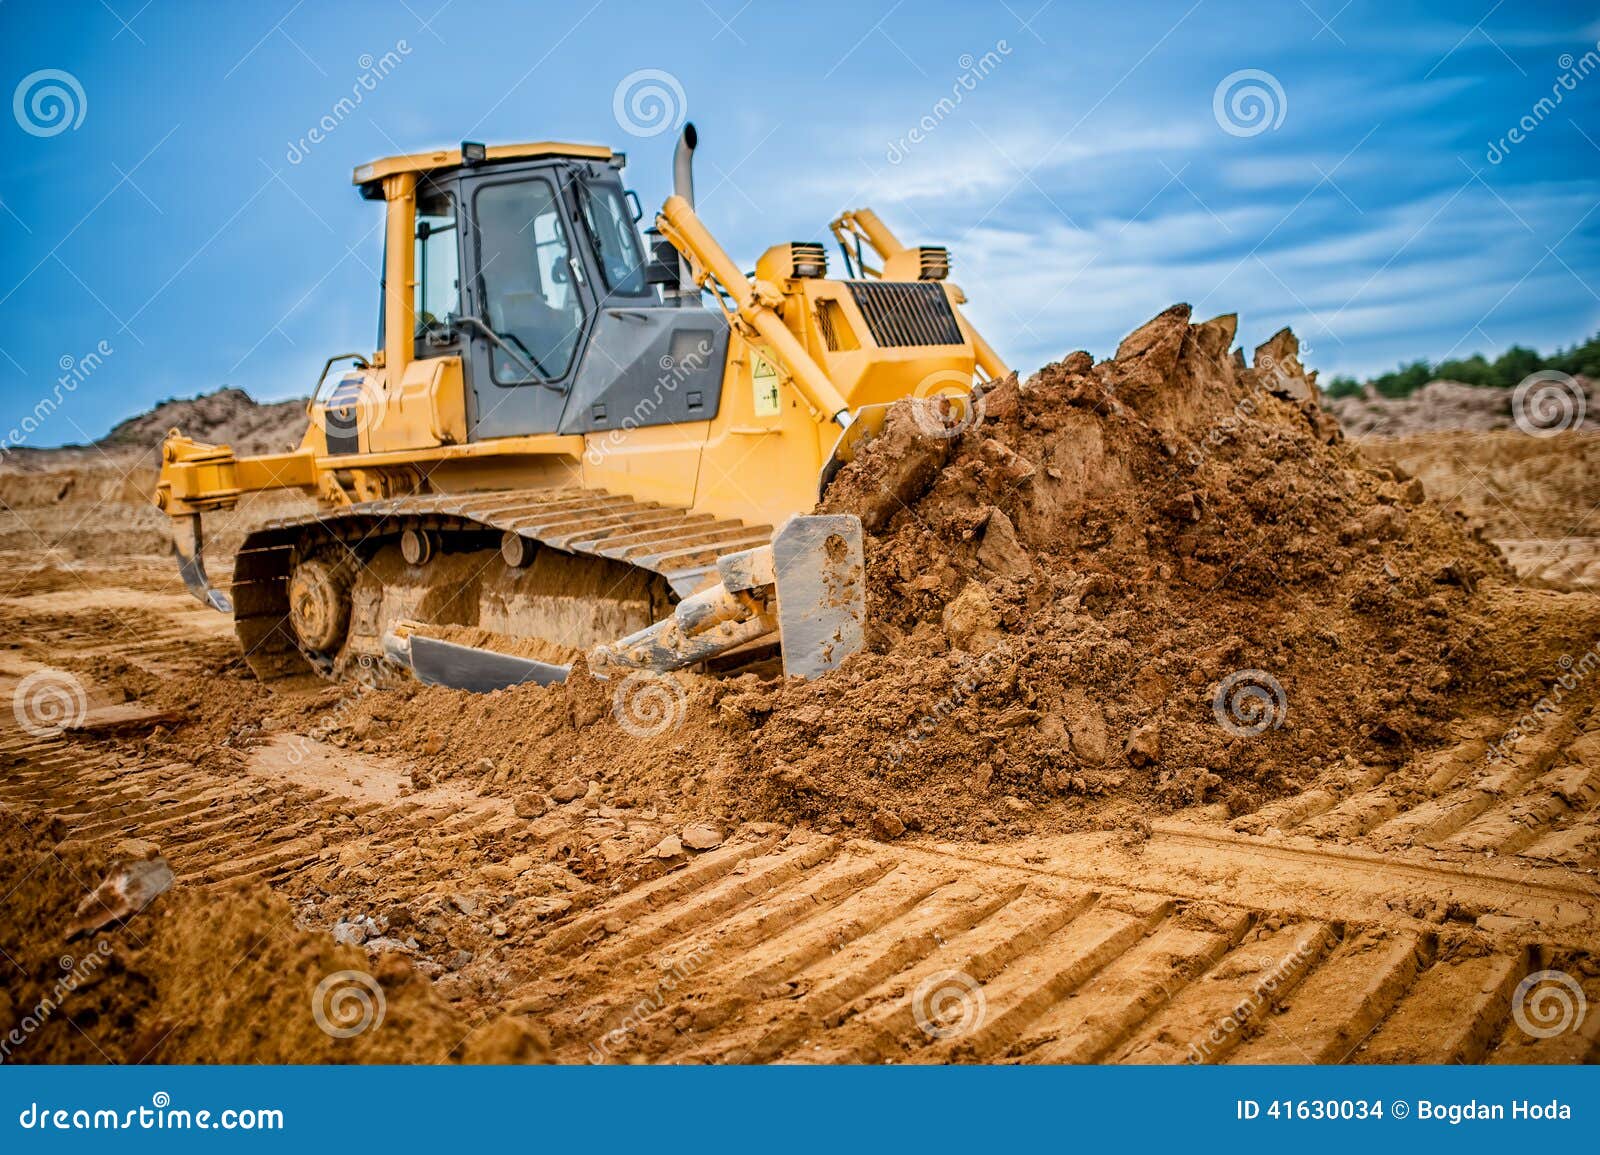 excavator working with earth and sand in sandpit